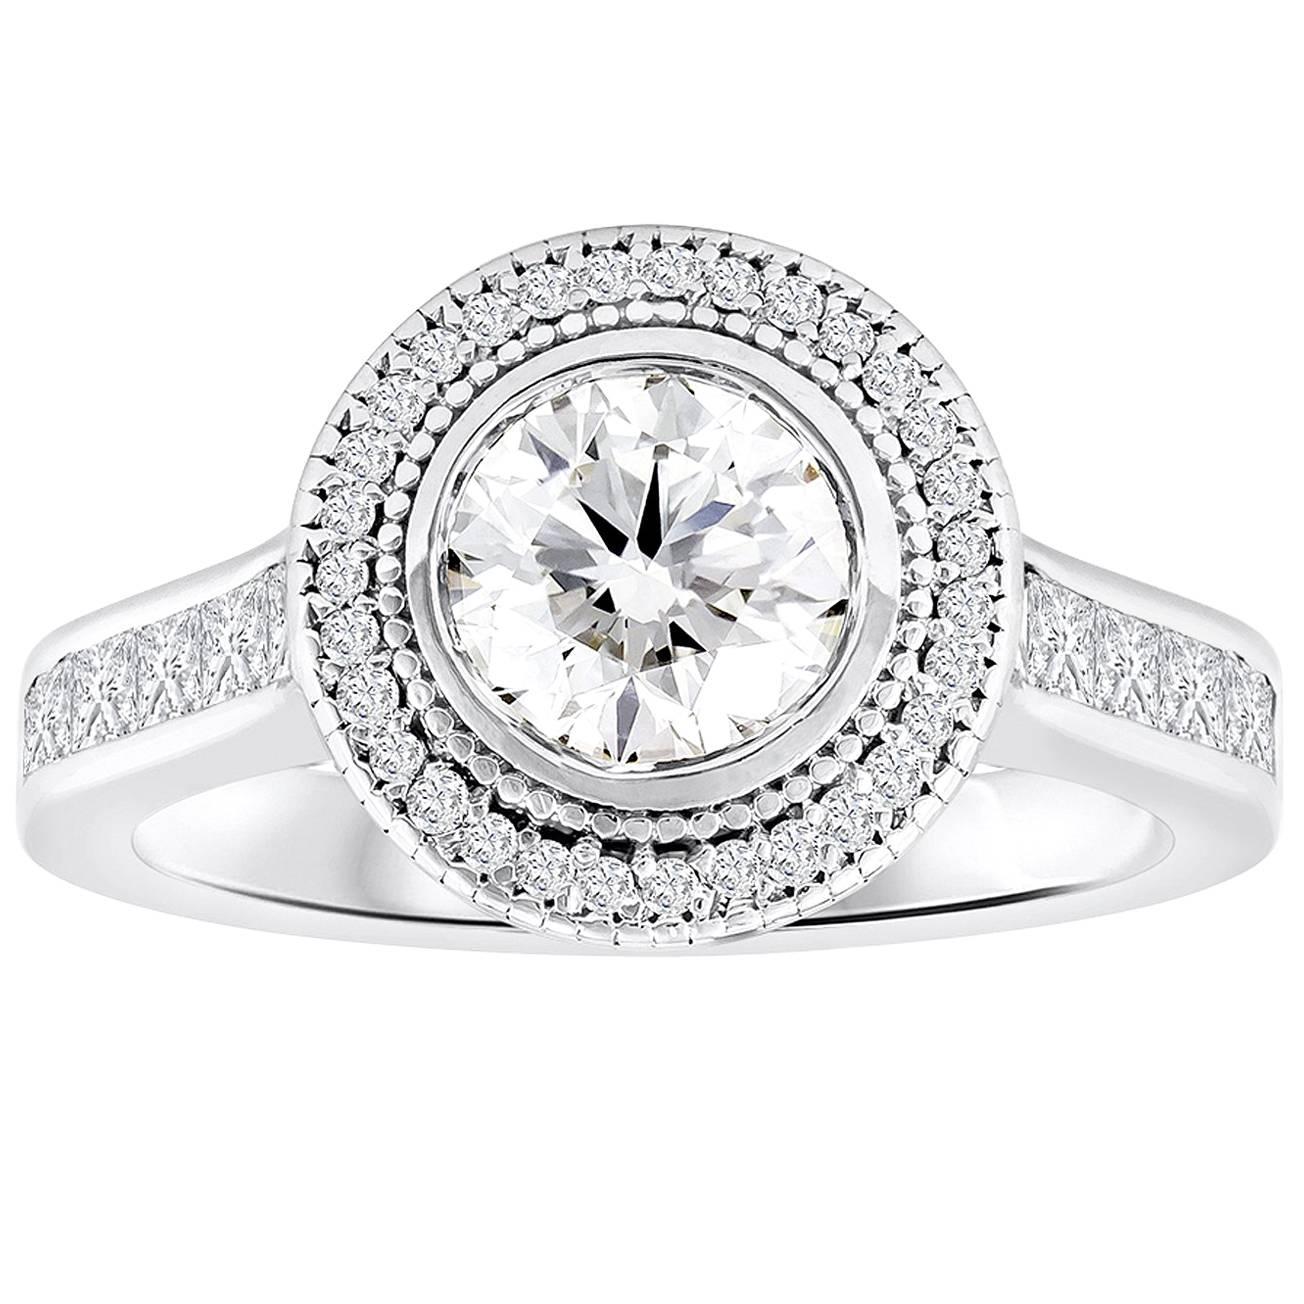 GIA Certified 1.00 carats Round Diamond Halo Antique-Style Engagement Ring